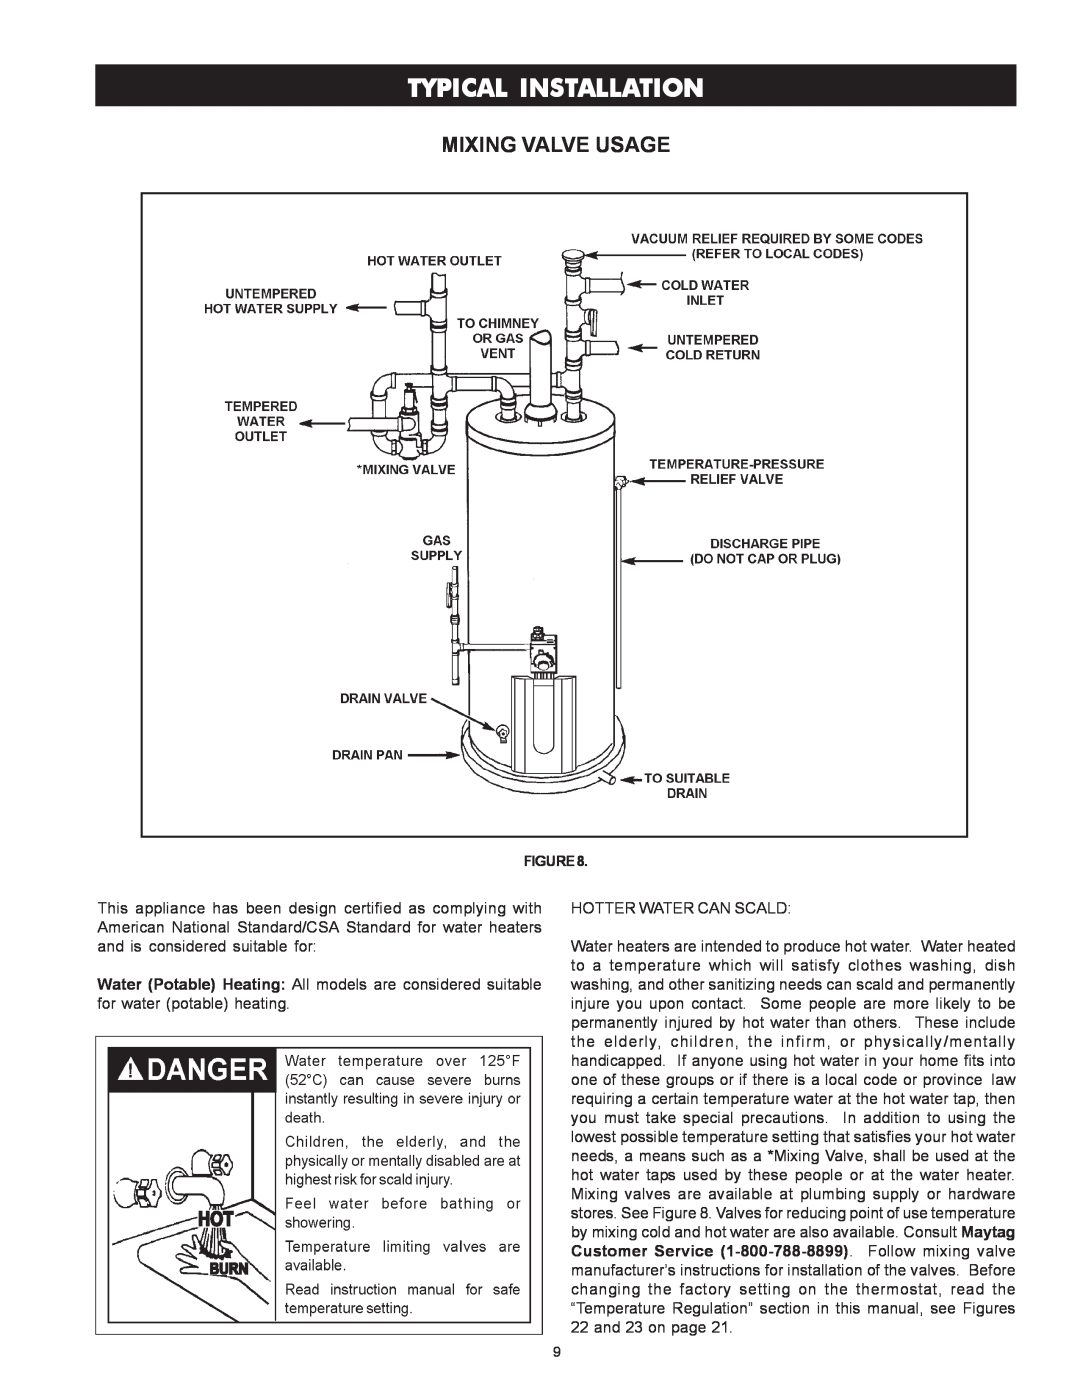 Maytag HRN4975S, HRP4975S, HRN5975S, HRP5975S manual Typical Installation, Mixing Valve Usage 